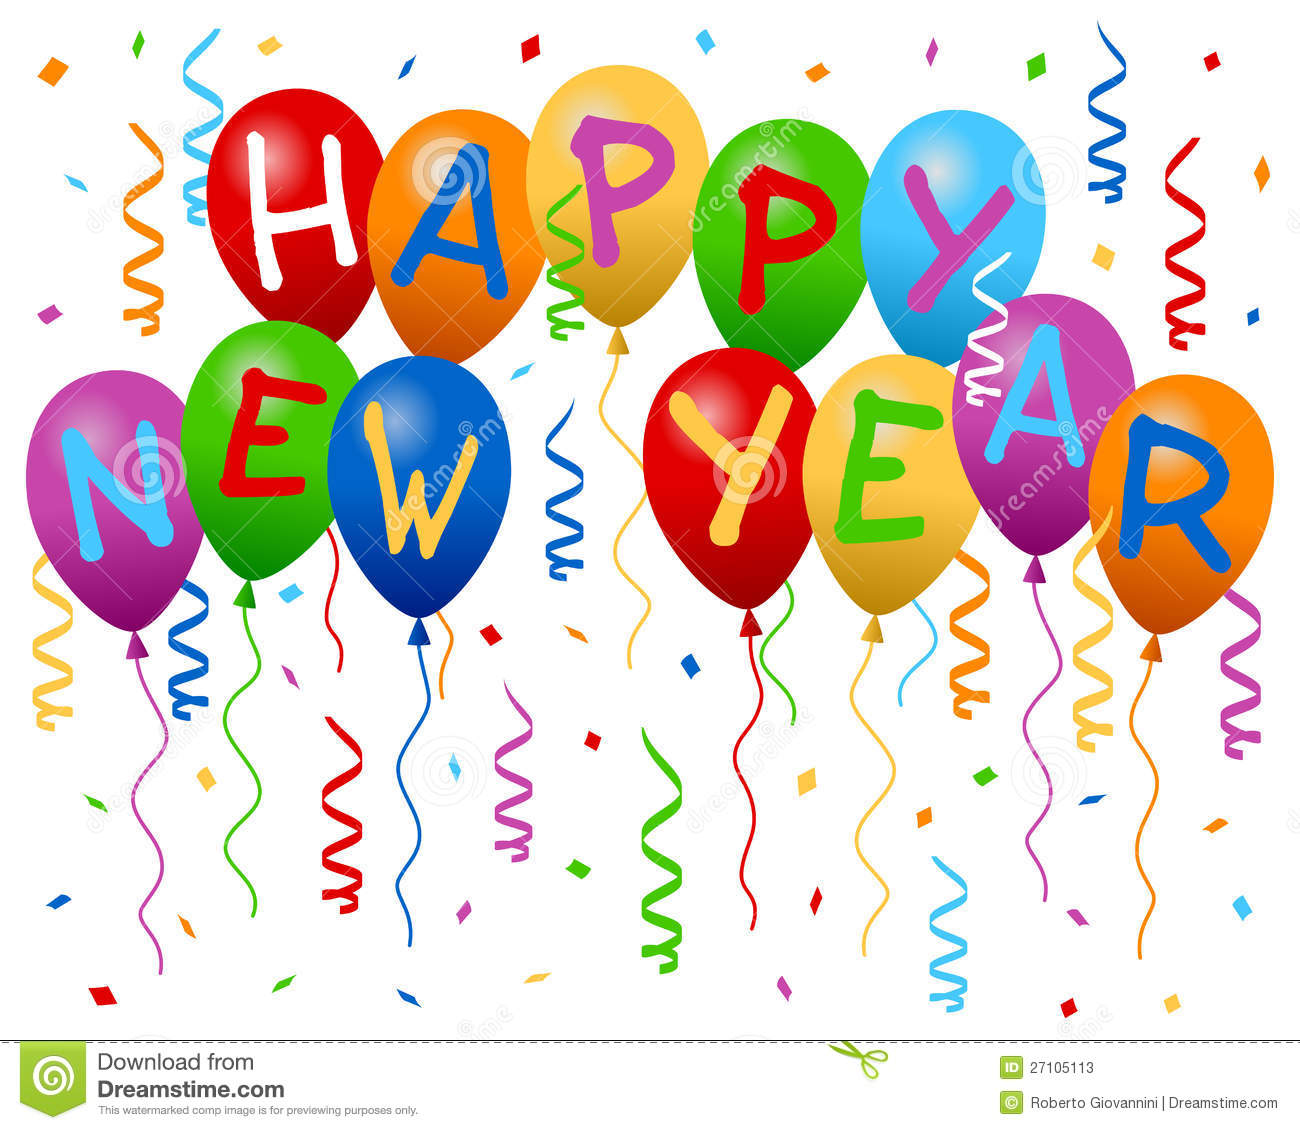 Happy New Year Clipart